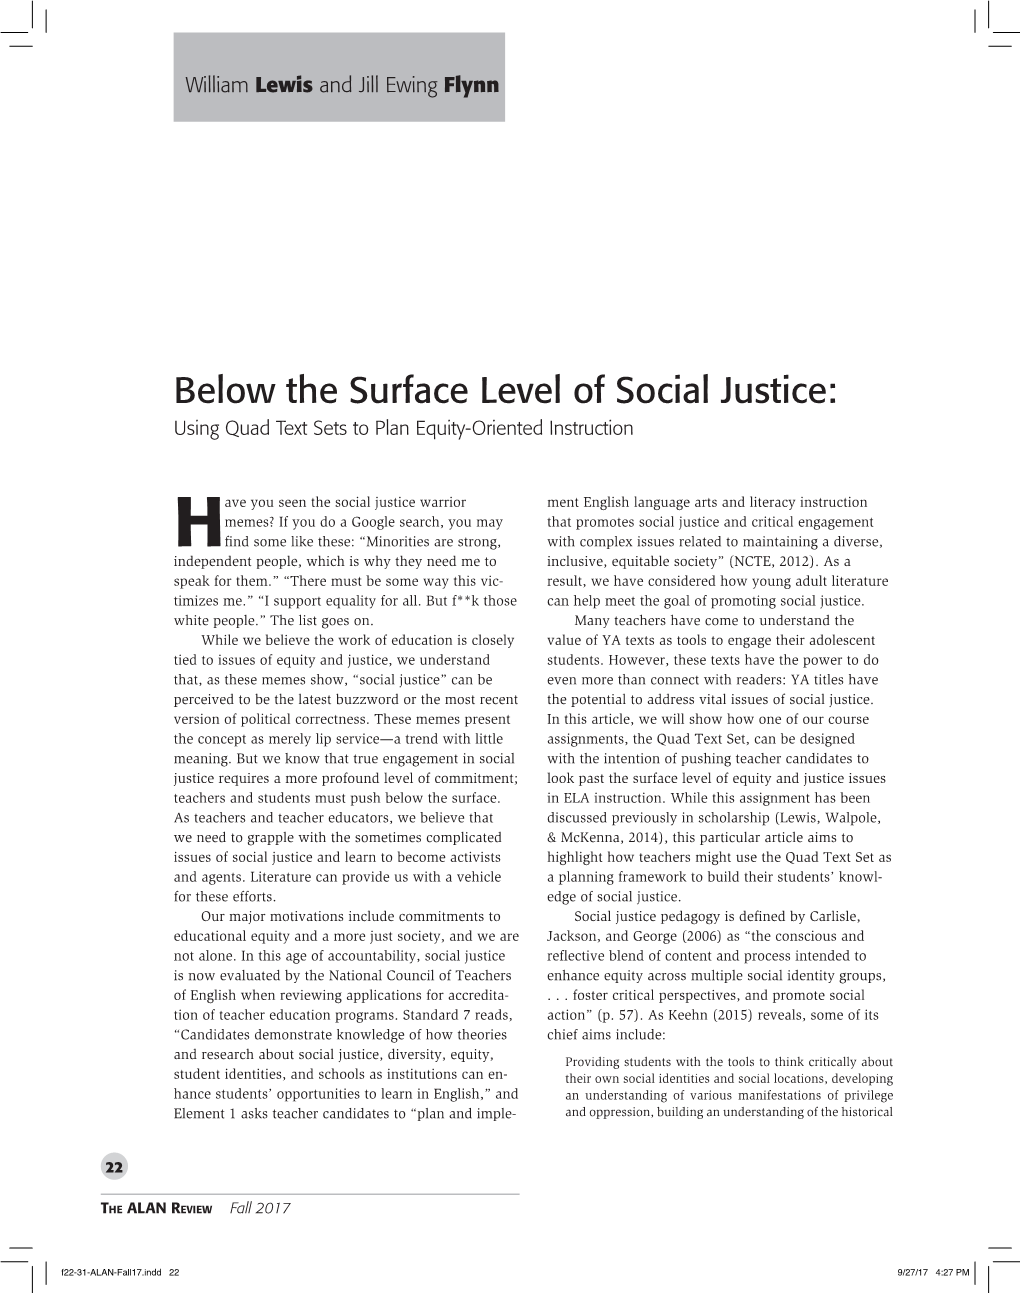 Below the Surface Level of Social Justice: Using Quad Text Sets to Plan Equity-Oriented Instruction